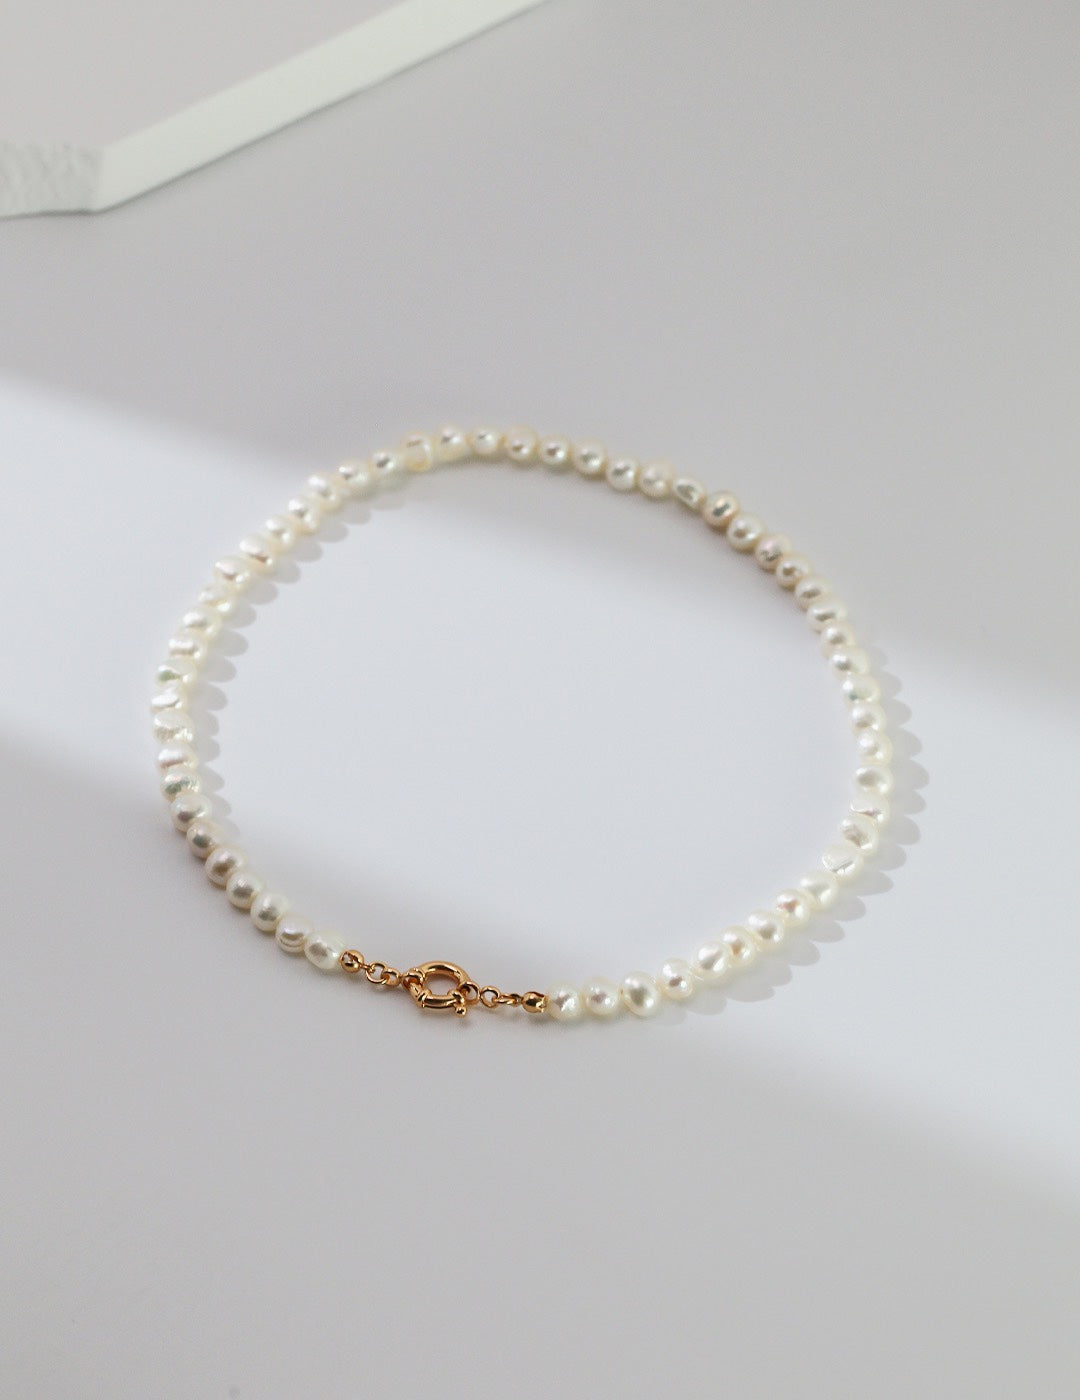 Minimalist Baroque Pearl Necklace with Gold Clasp